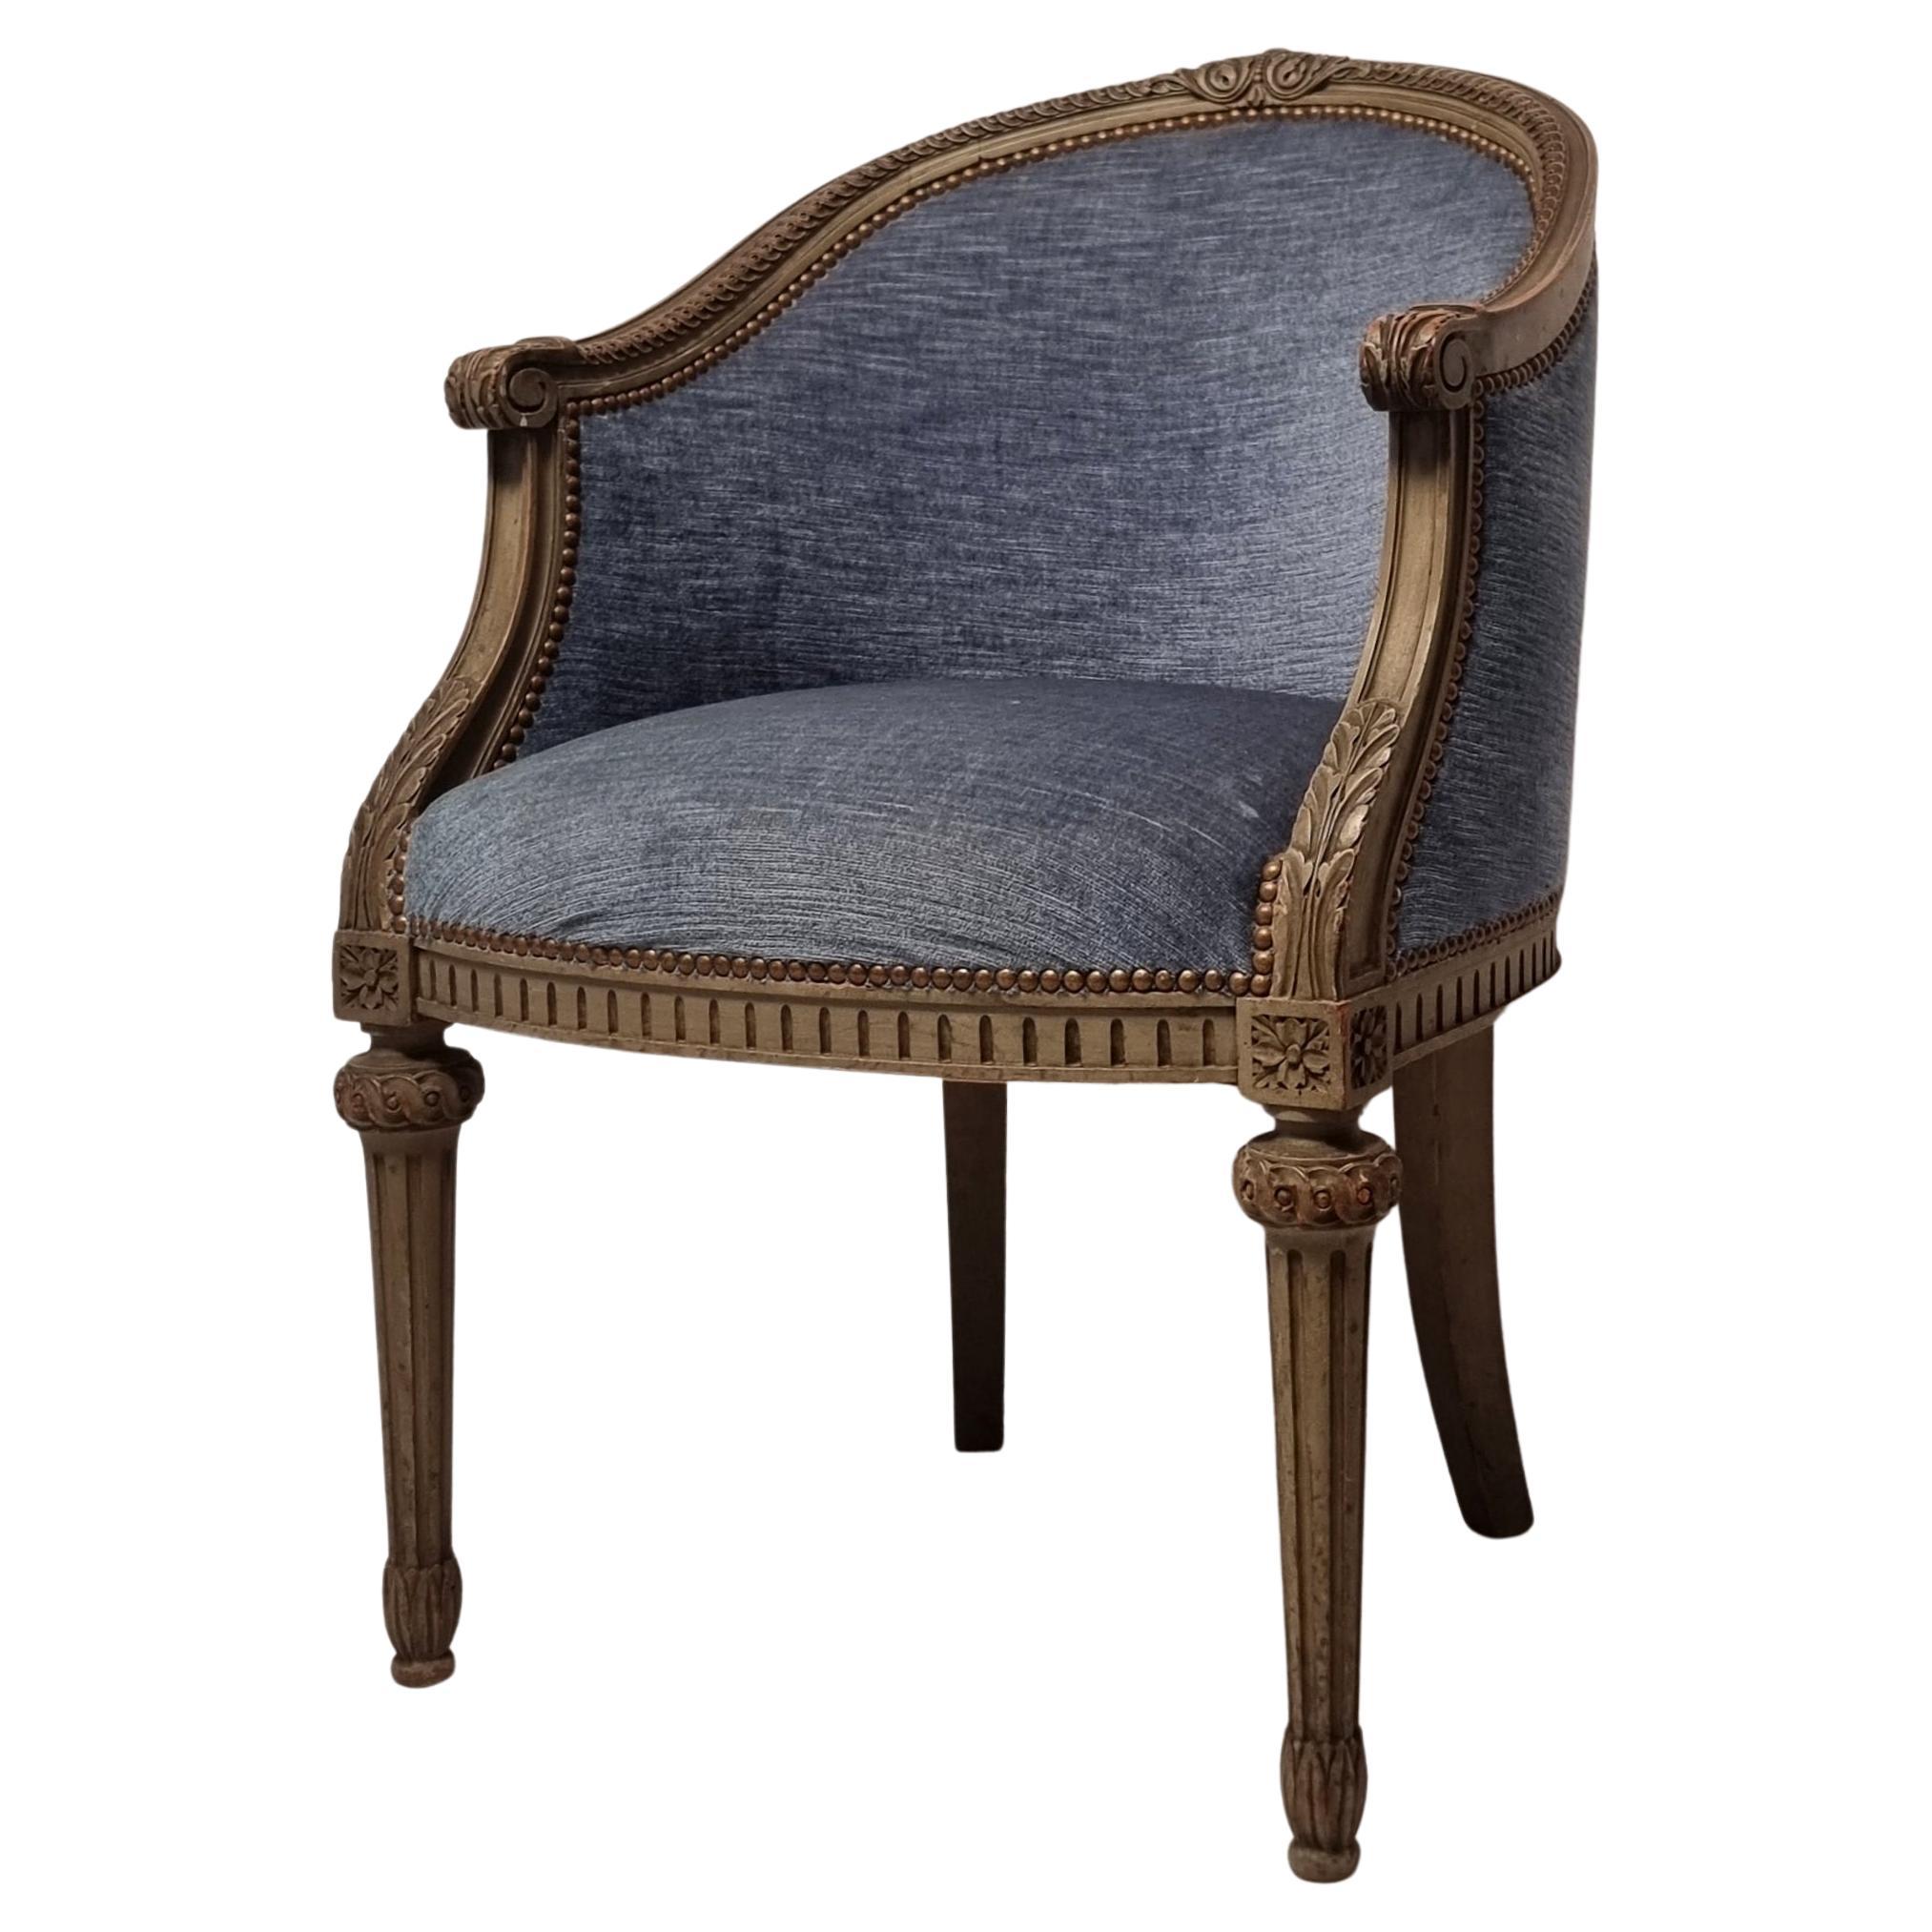 Louis XVI Style Office Armchair - Patinated Wood - Early 19th